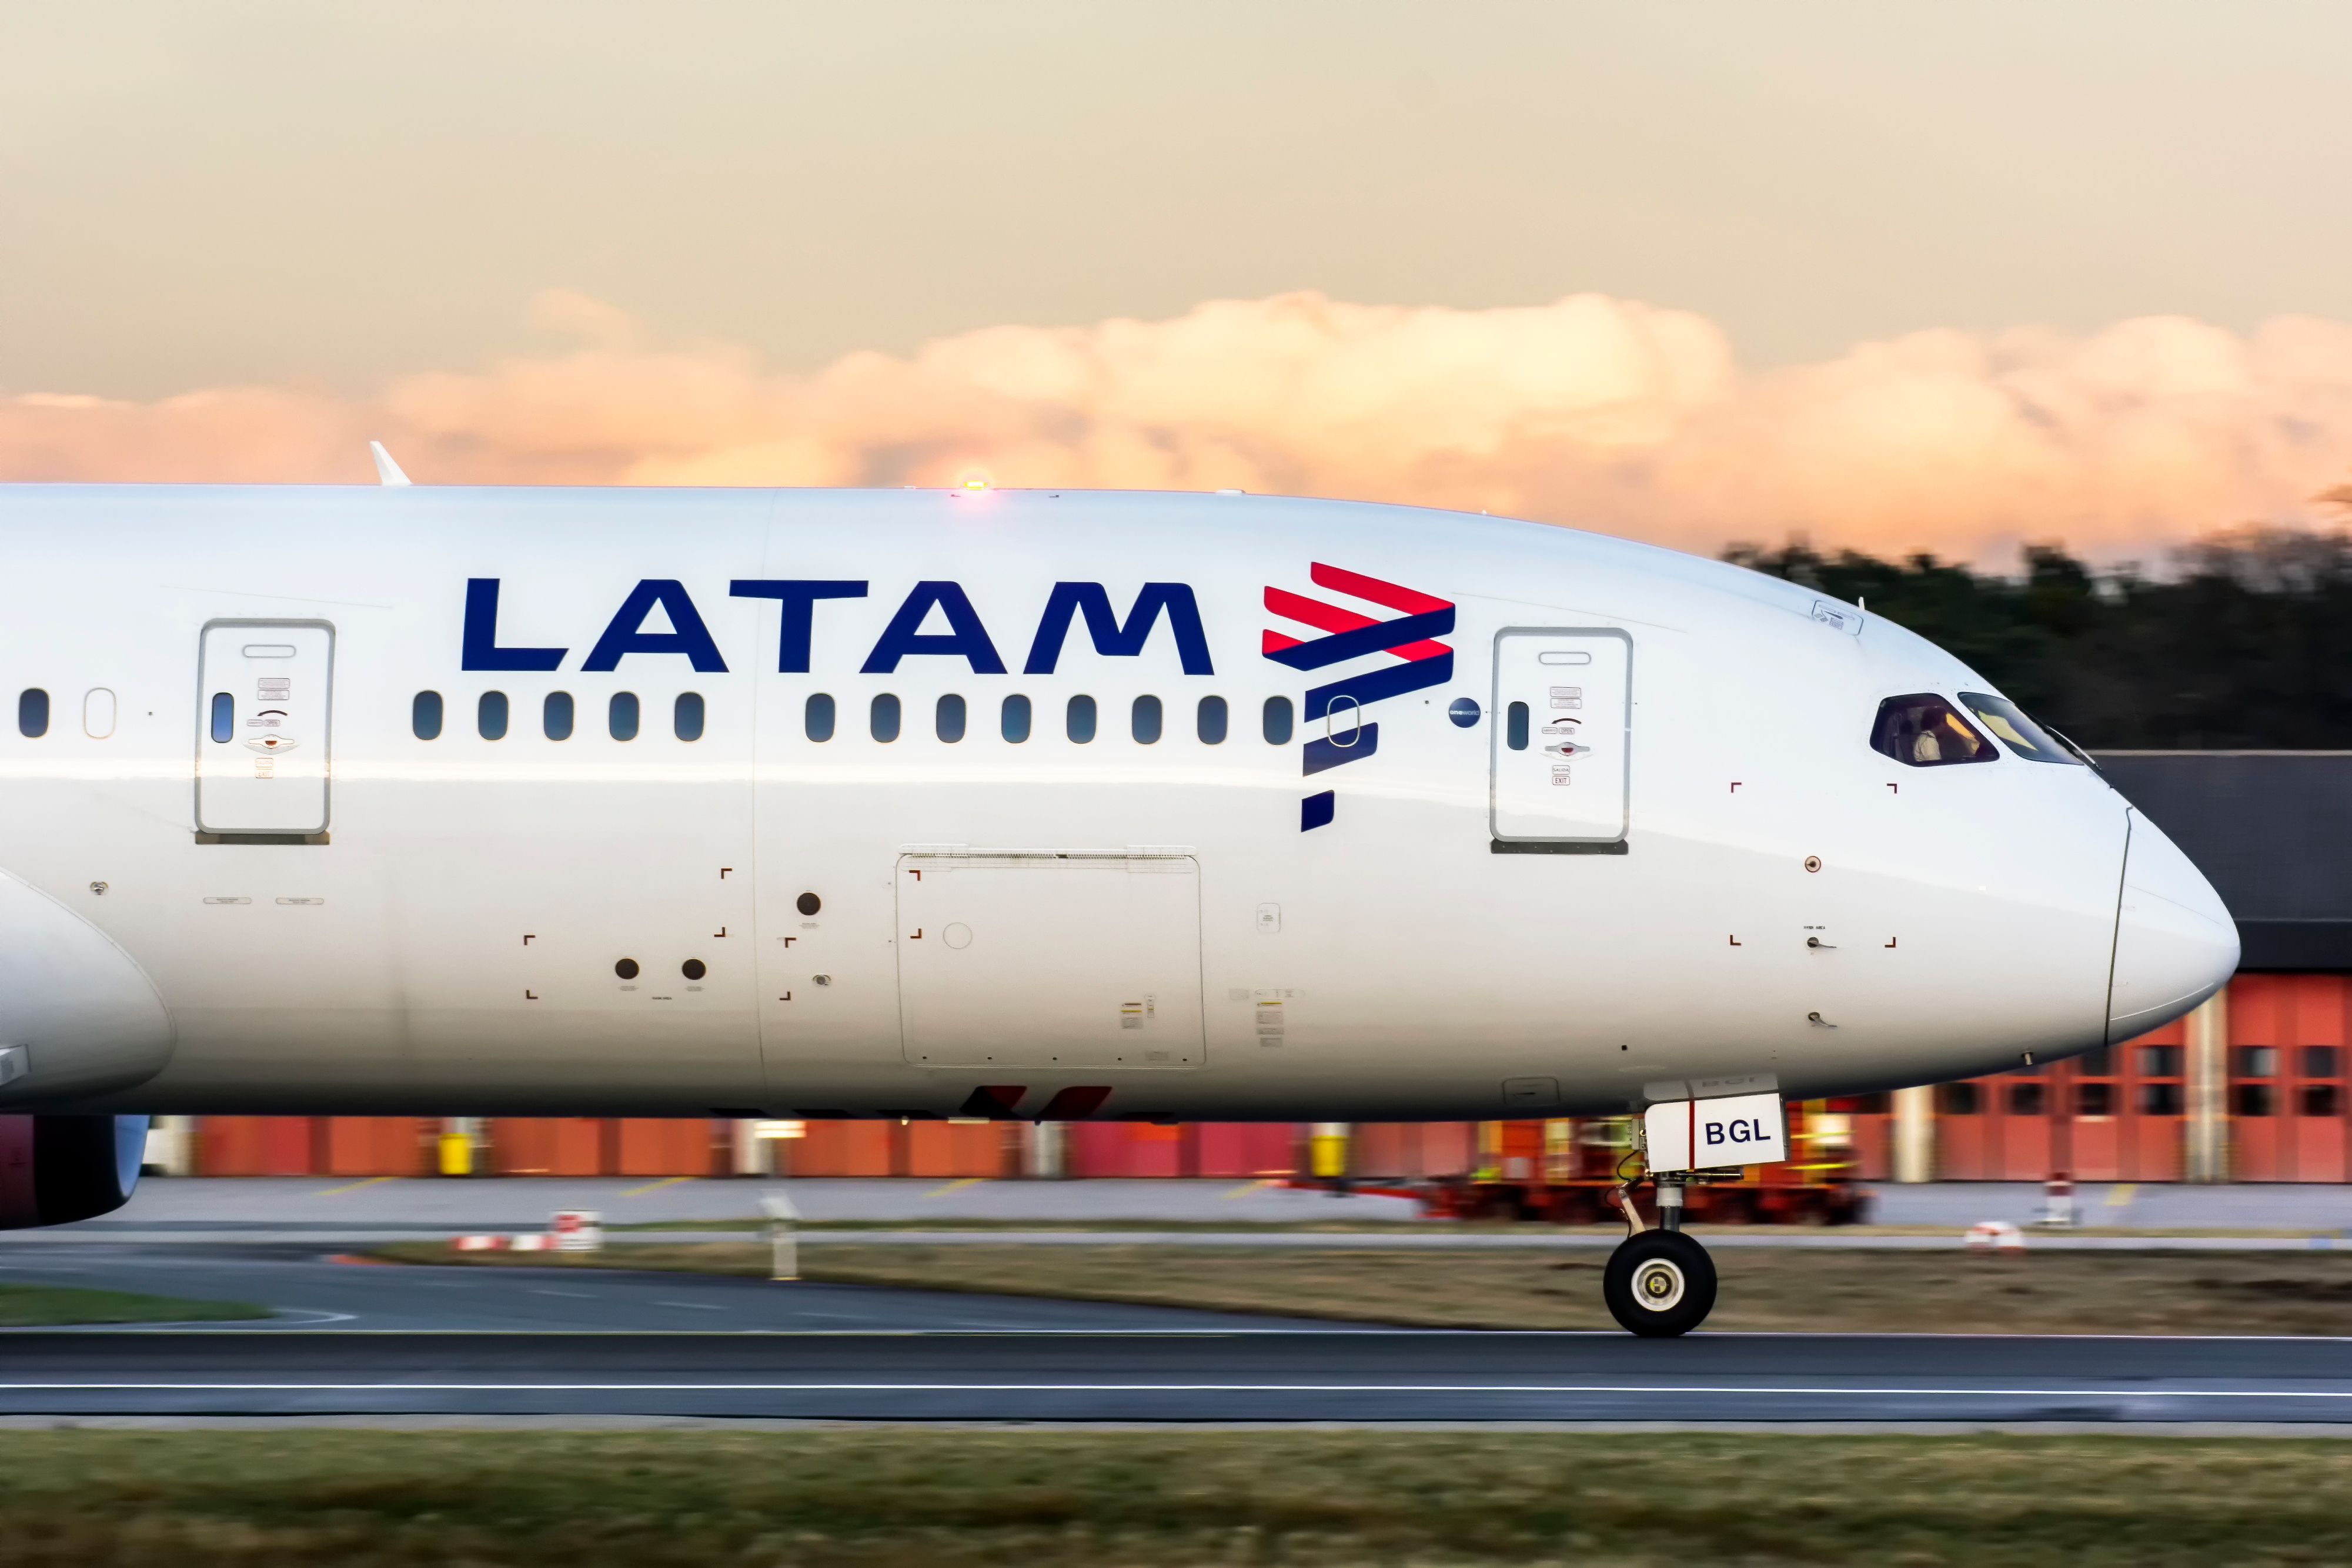 A LATAM Airlines Boeing 787-9 on an airport apron.